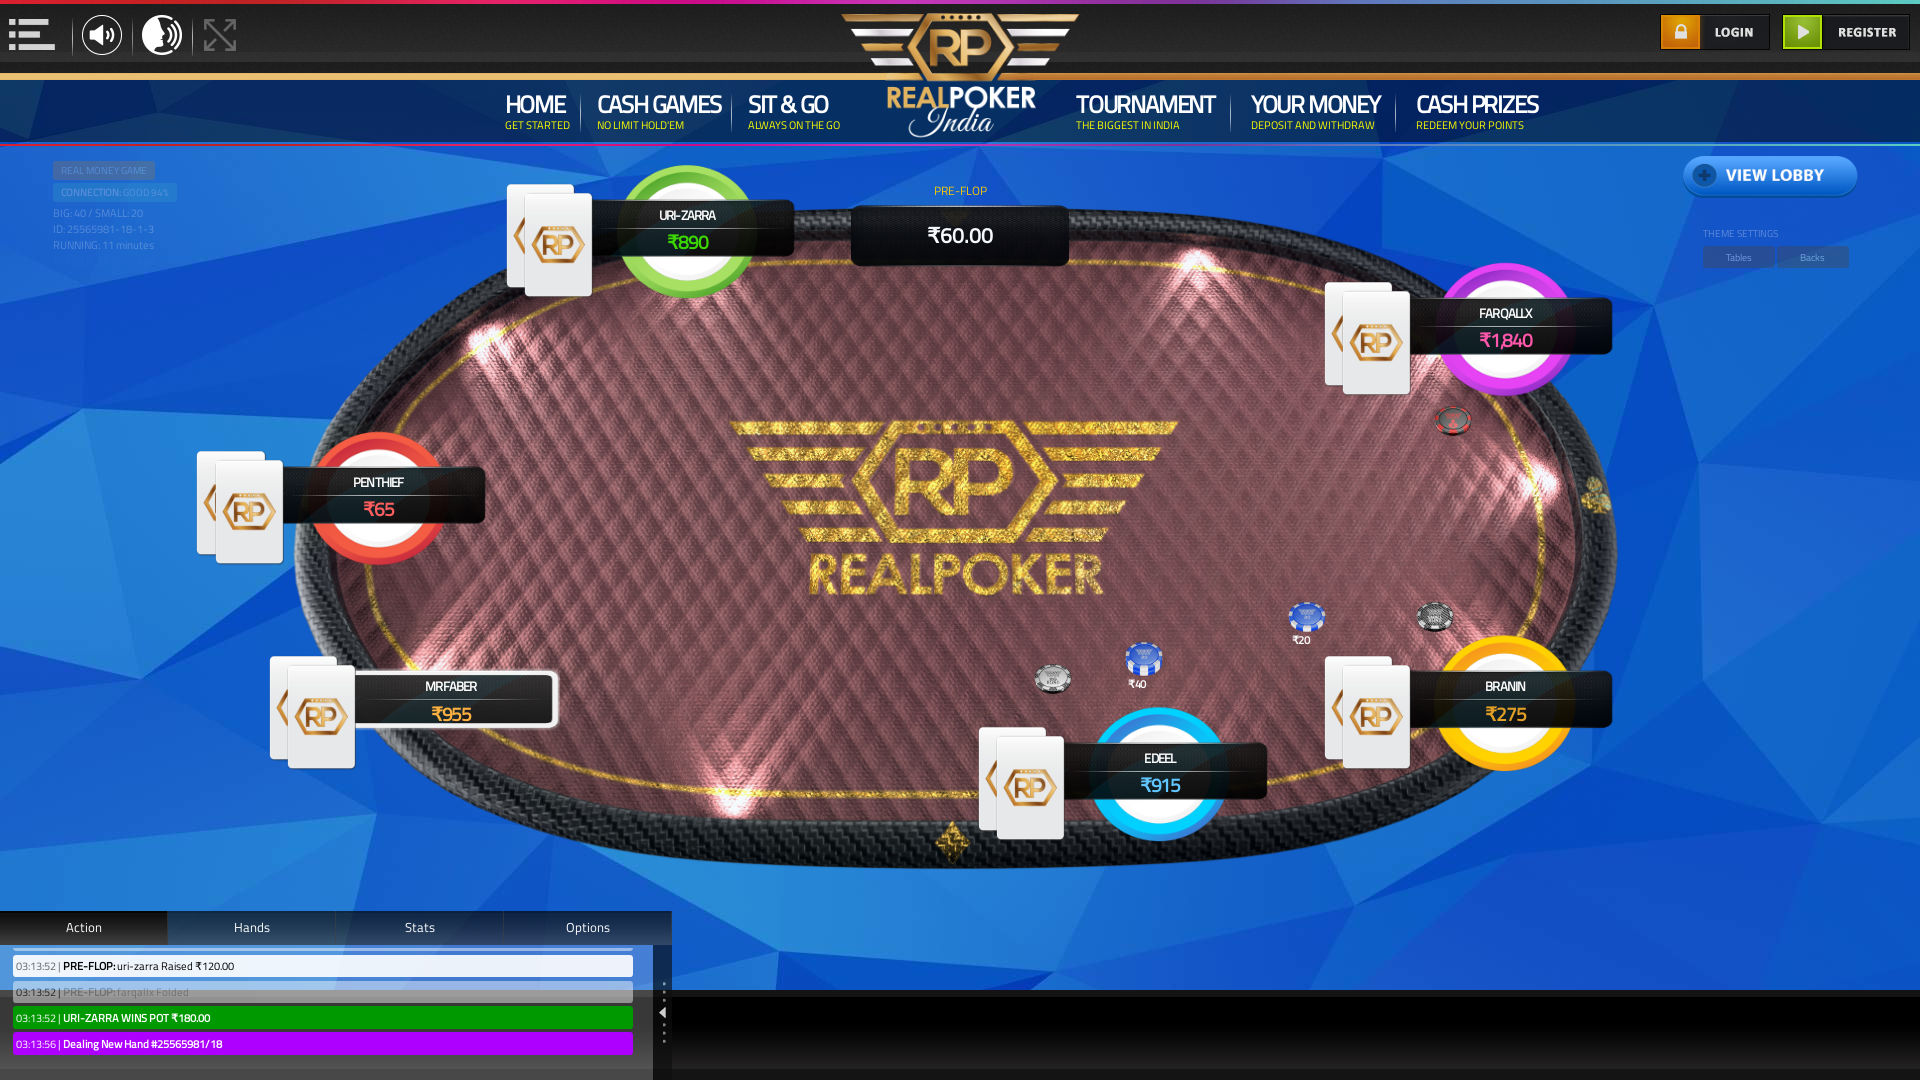 Mangaluru texas holdem poker table on a 10 player table in the 10th minute of the match